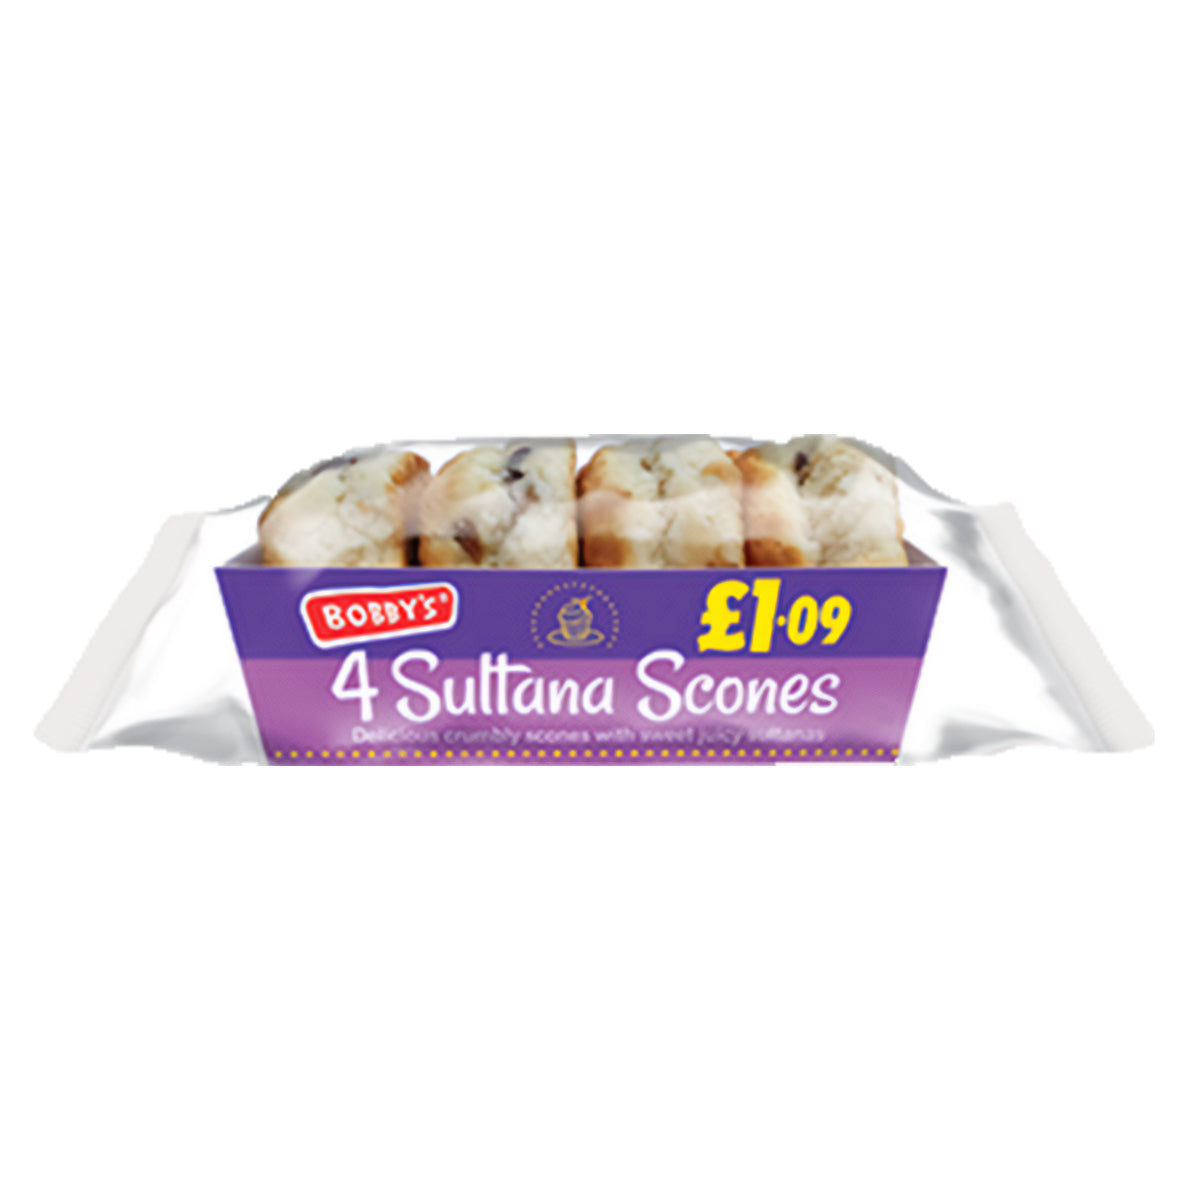 Bobbys - Sultana Scones - 4 Pack on a white background.